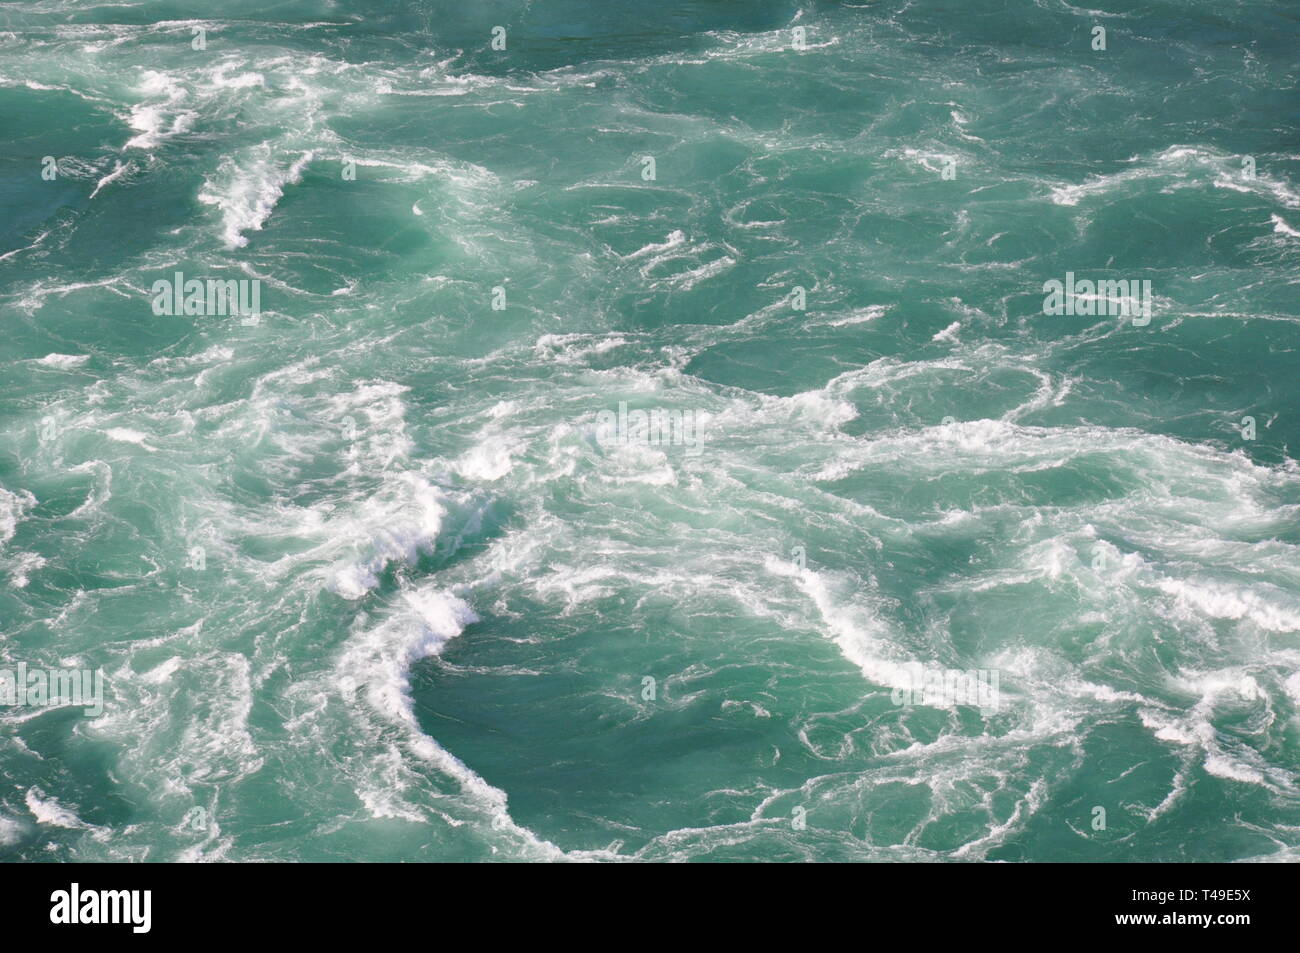 The Choppy Waters of the Niagara Whirlpool on the Niagara River downstream from Niagara Falls Canada and United States Stock Photo